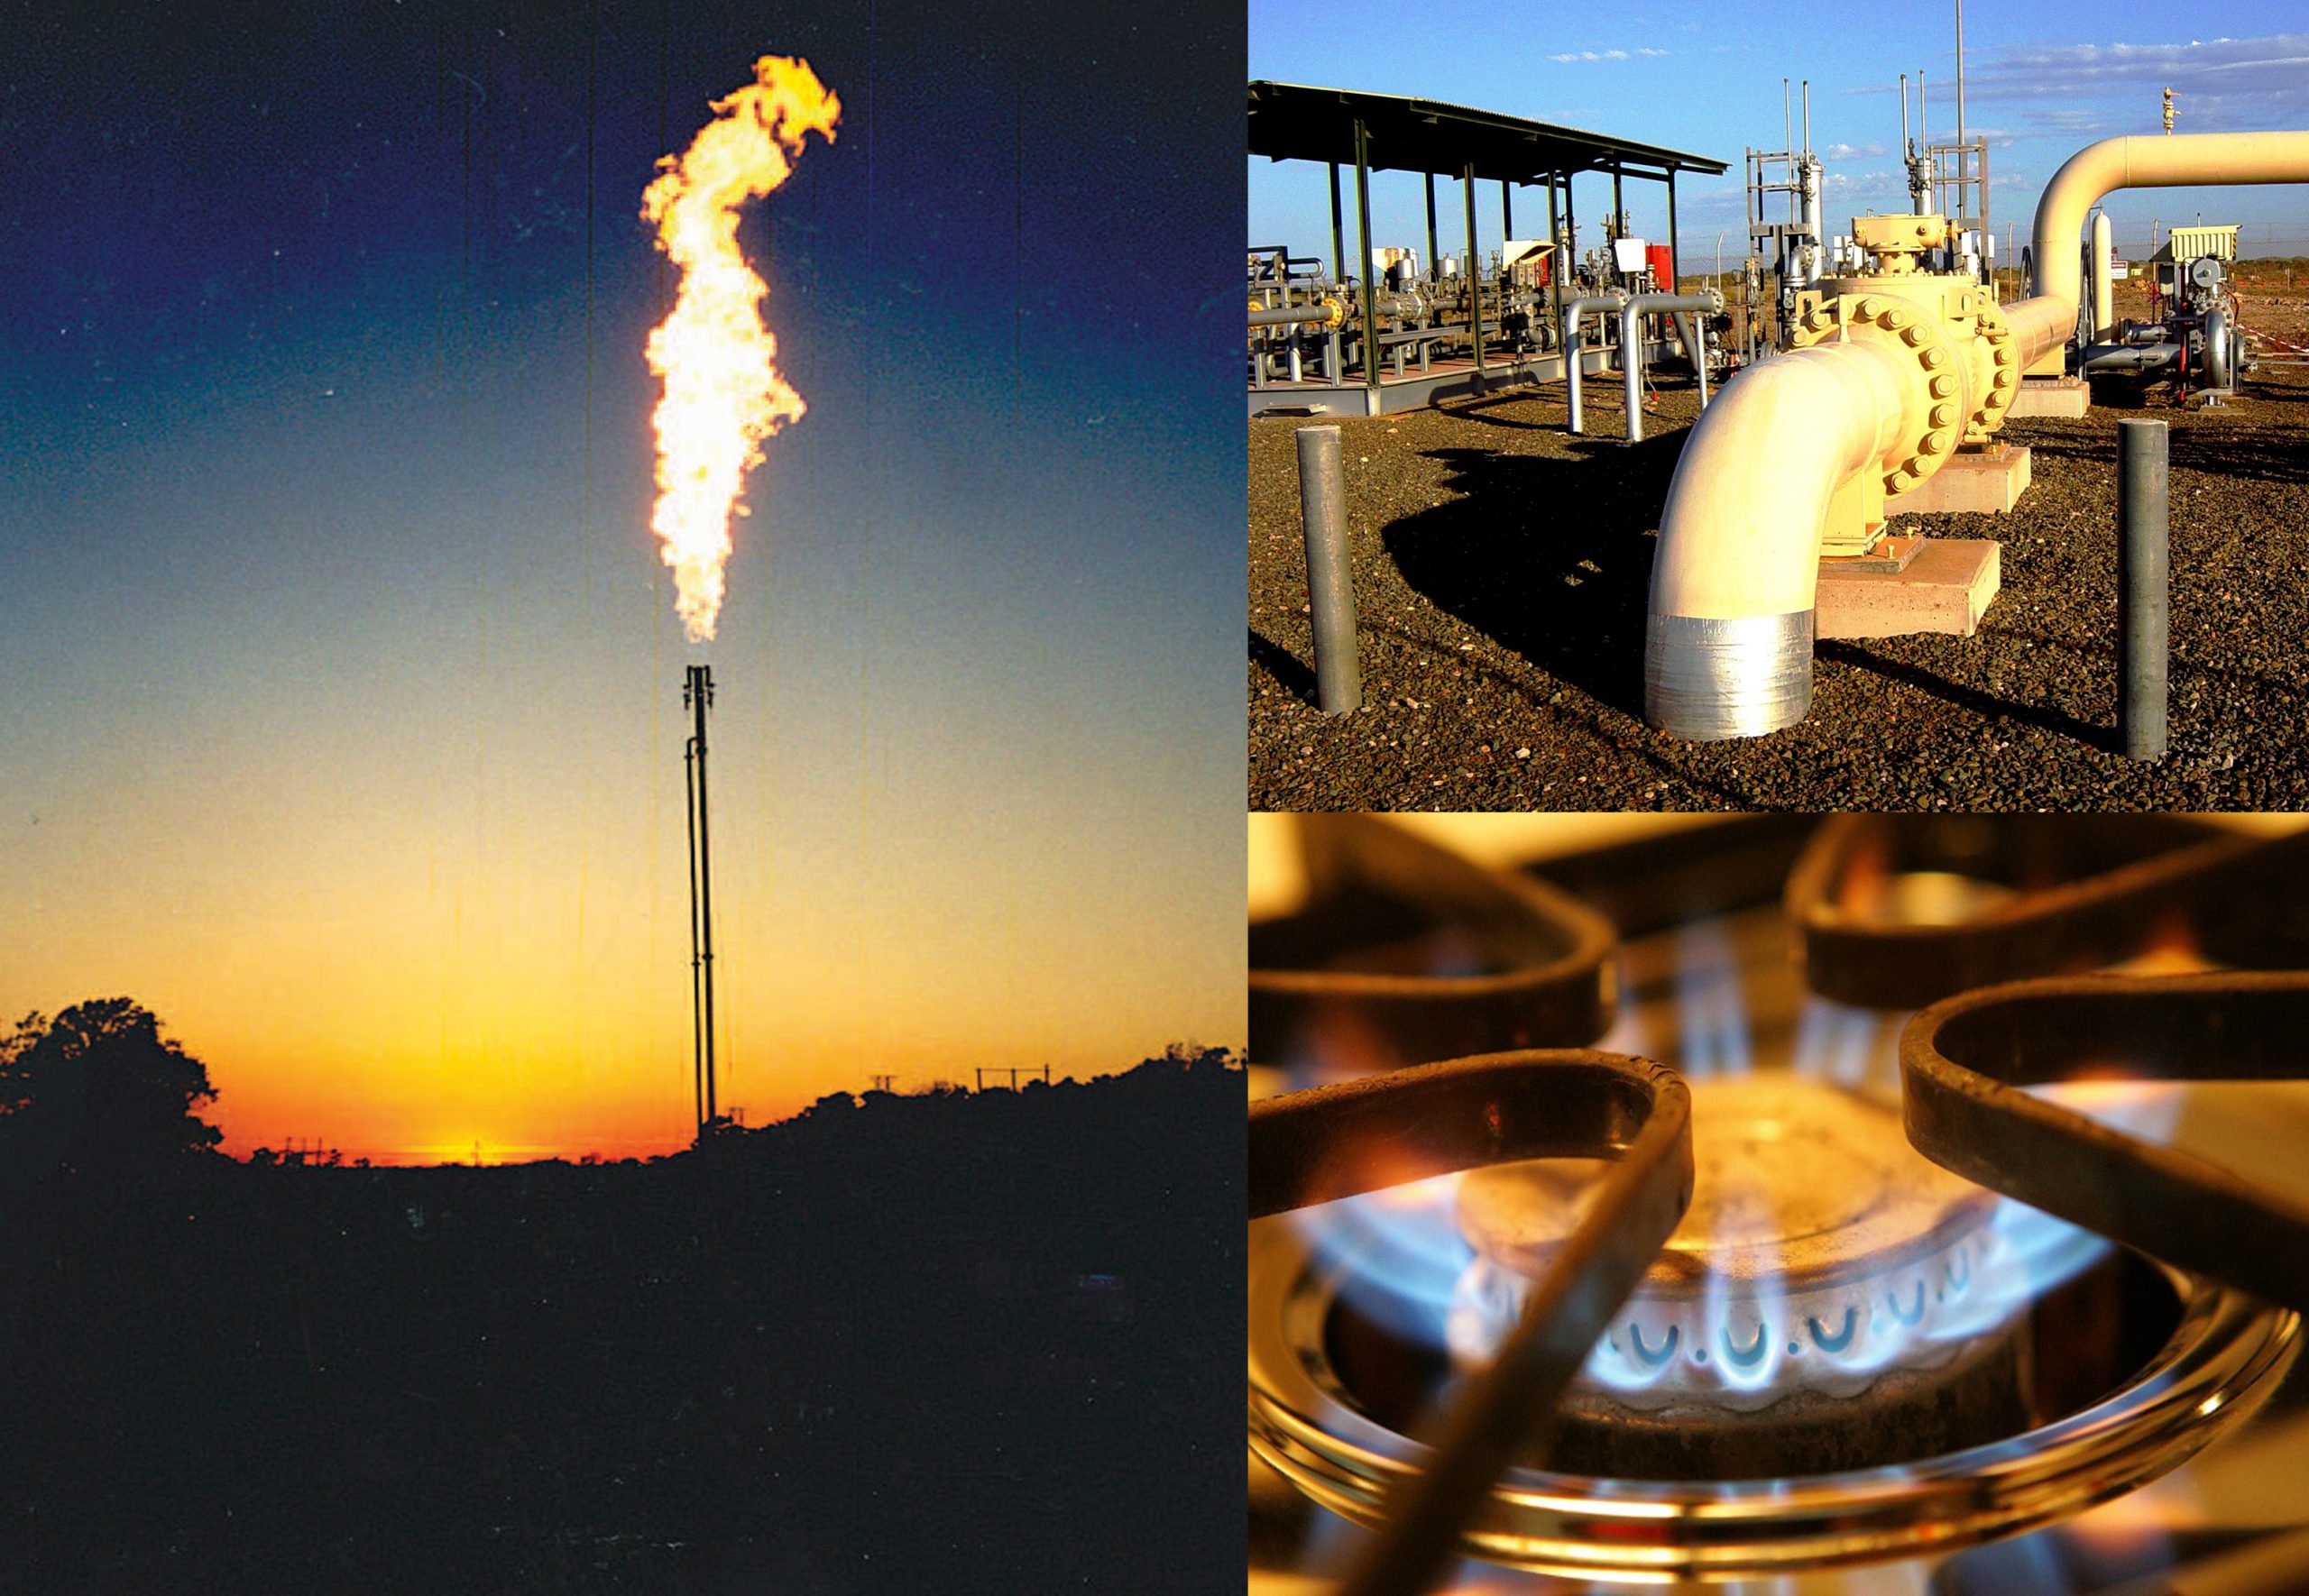 Are you the Natural Gas?? - Alliance for Affordable Energy